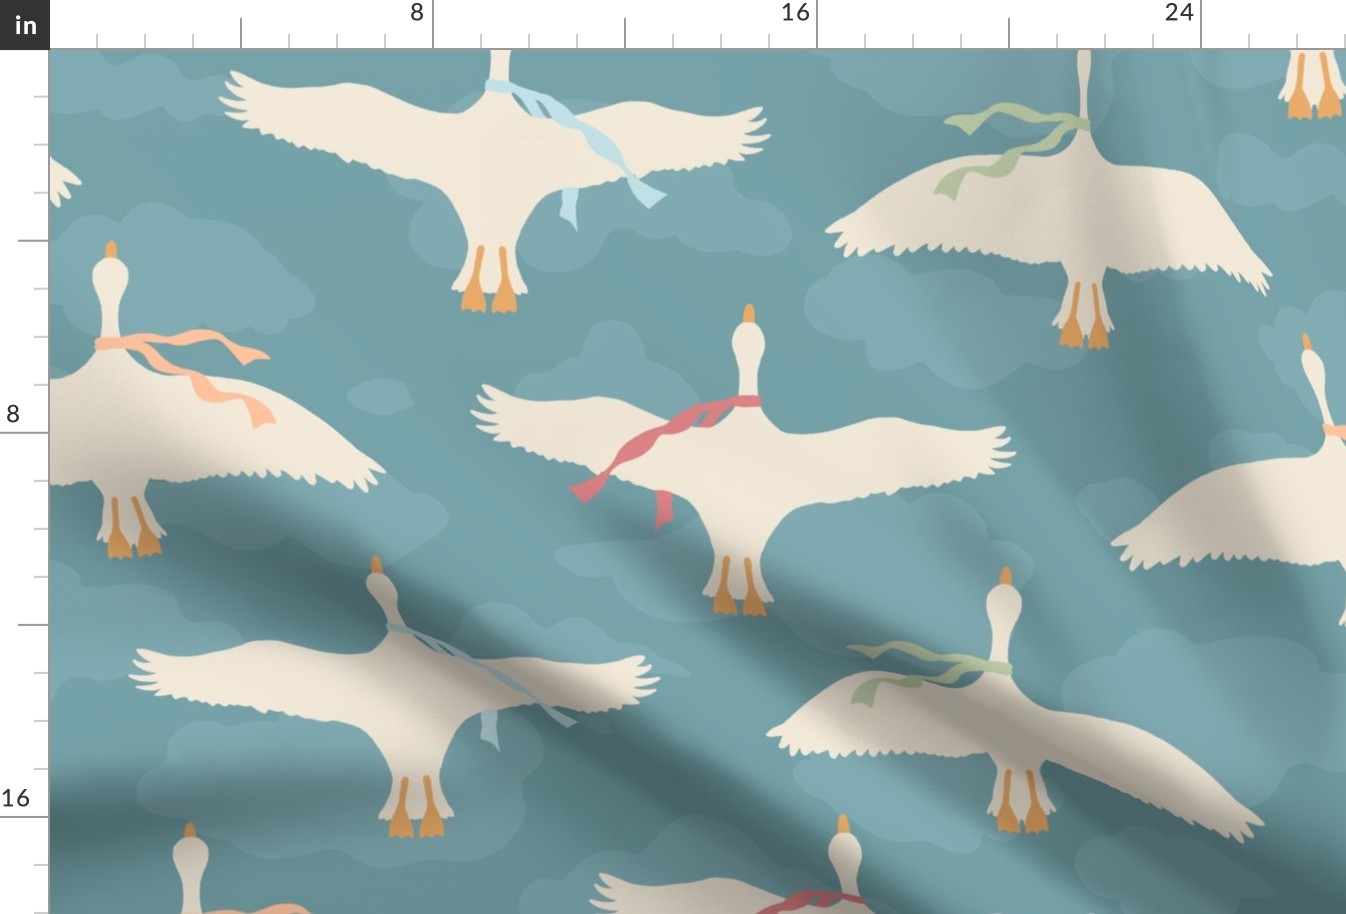 Flying White Geese in Clouds with Scarves XL (24x24)